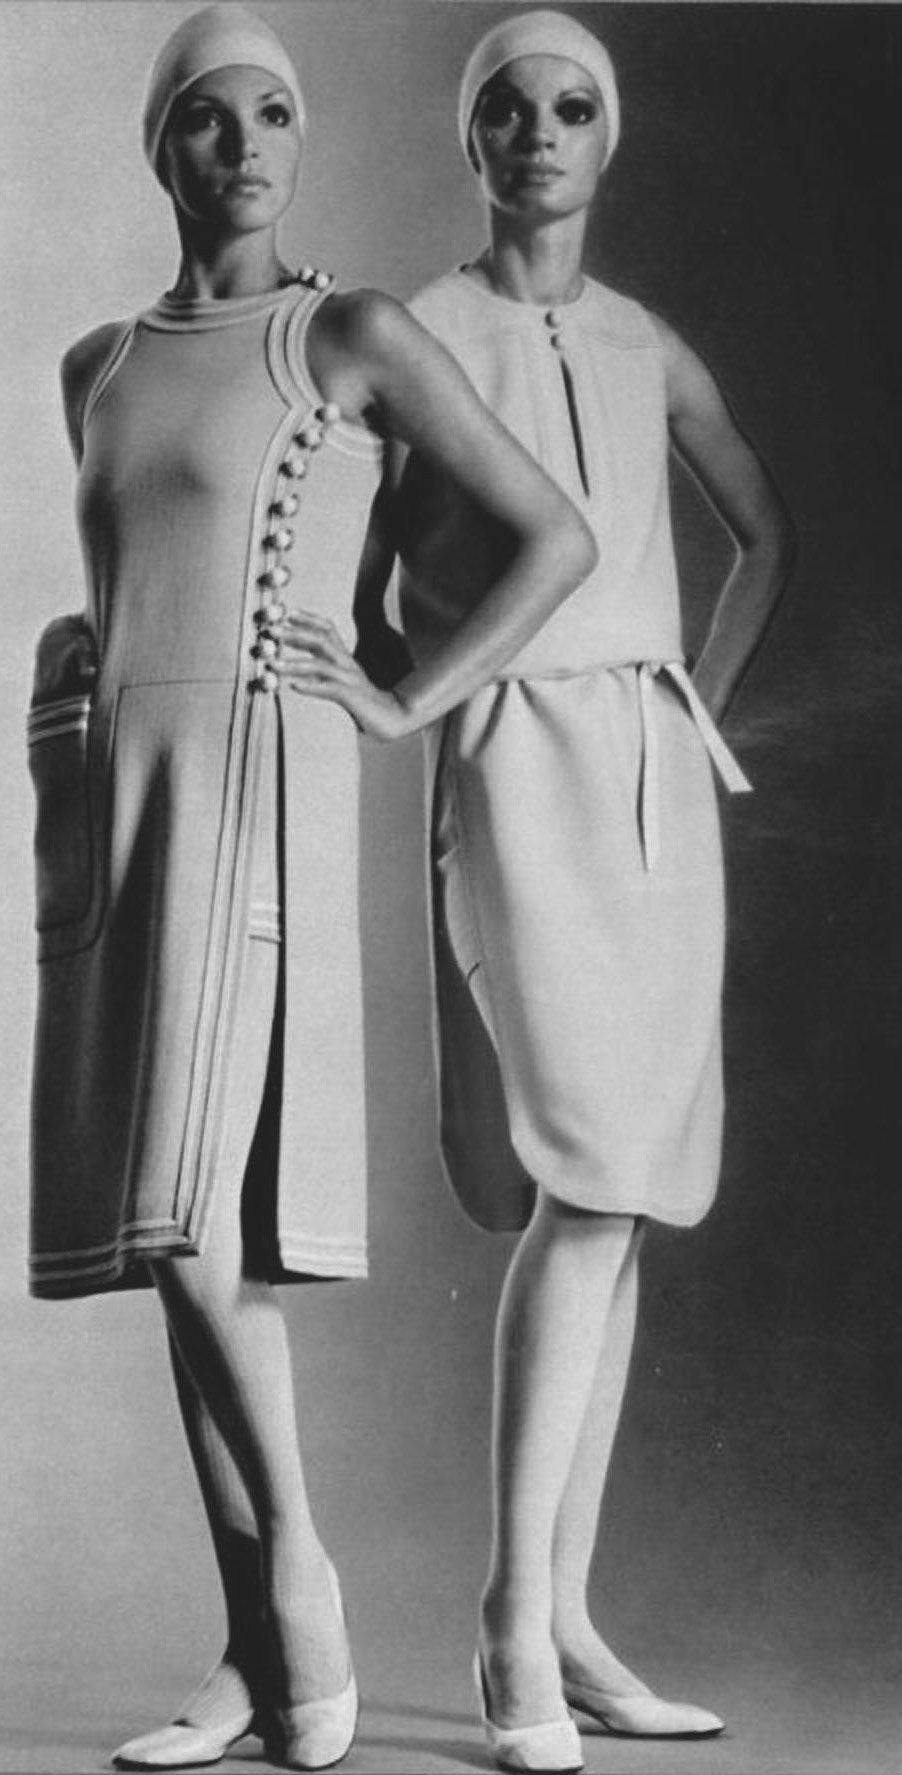 Spectacular Pierre Cardin mod dress ensemble in a vibrant yellow linen from his 1969 collection. In 1951 Cardin opened his own couture house and by 1957, he started a ready-to-wear line; a bold move for a French couturier at the time. The look most